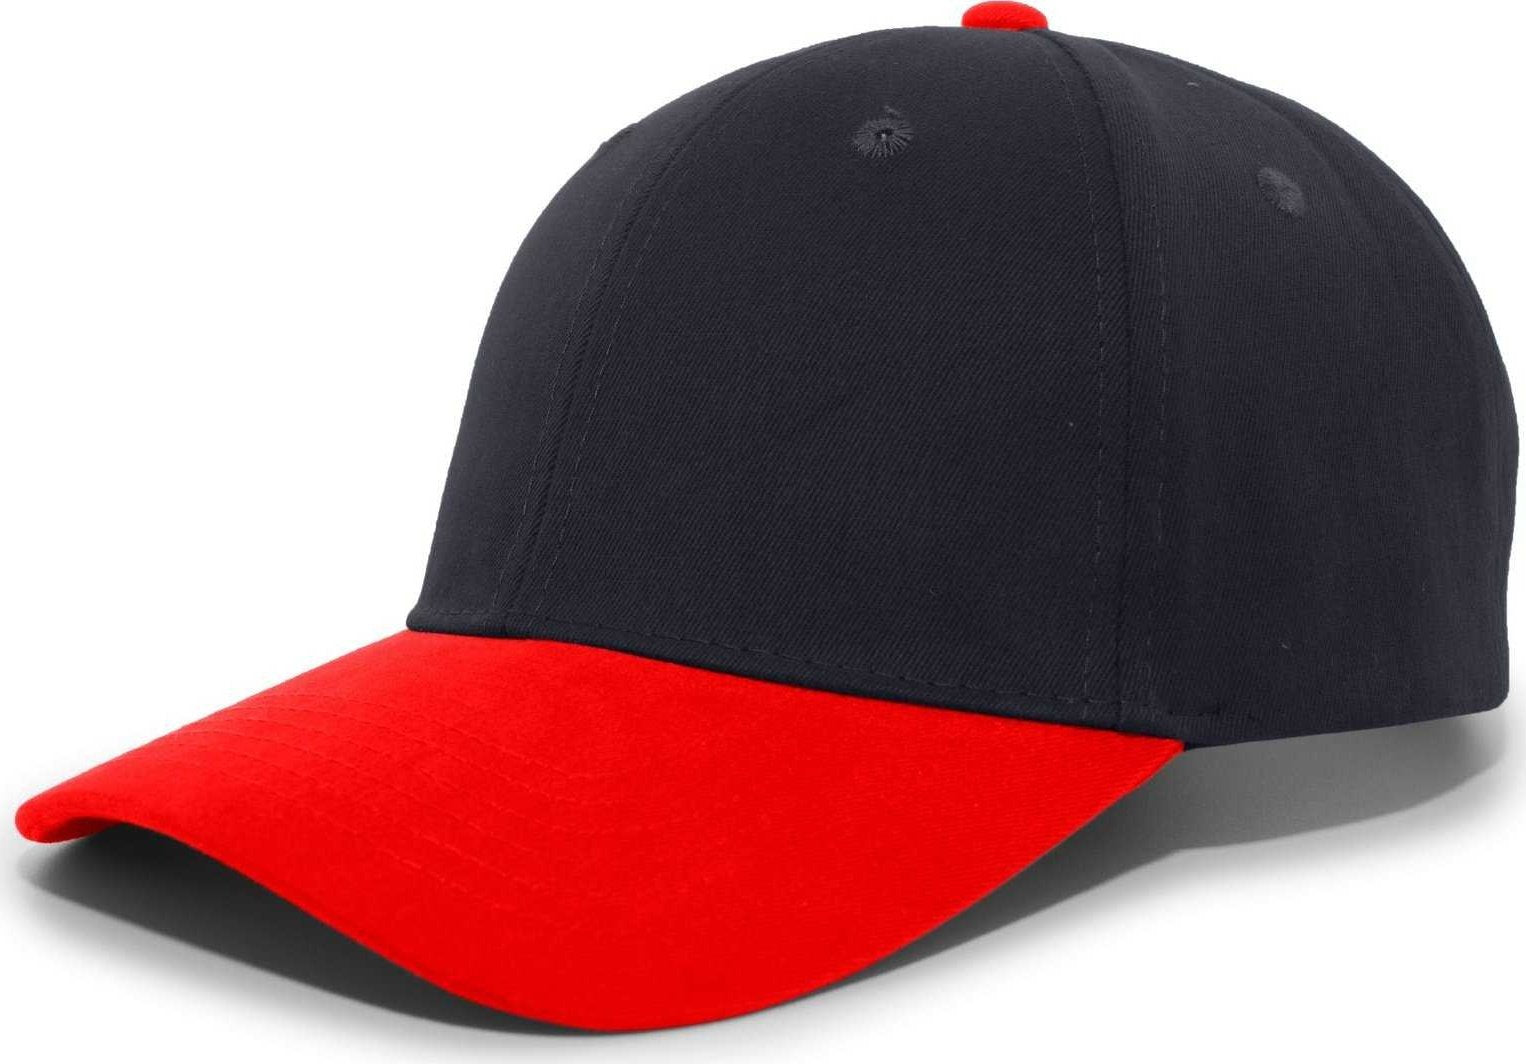 Pacific Cap Brushed Cotton Navy - 101C Headwear Red Hook-and-Loop